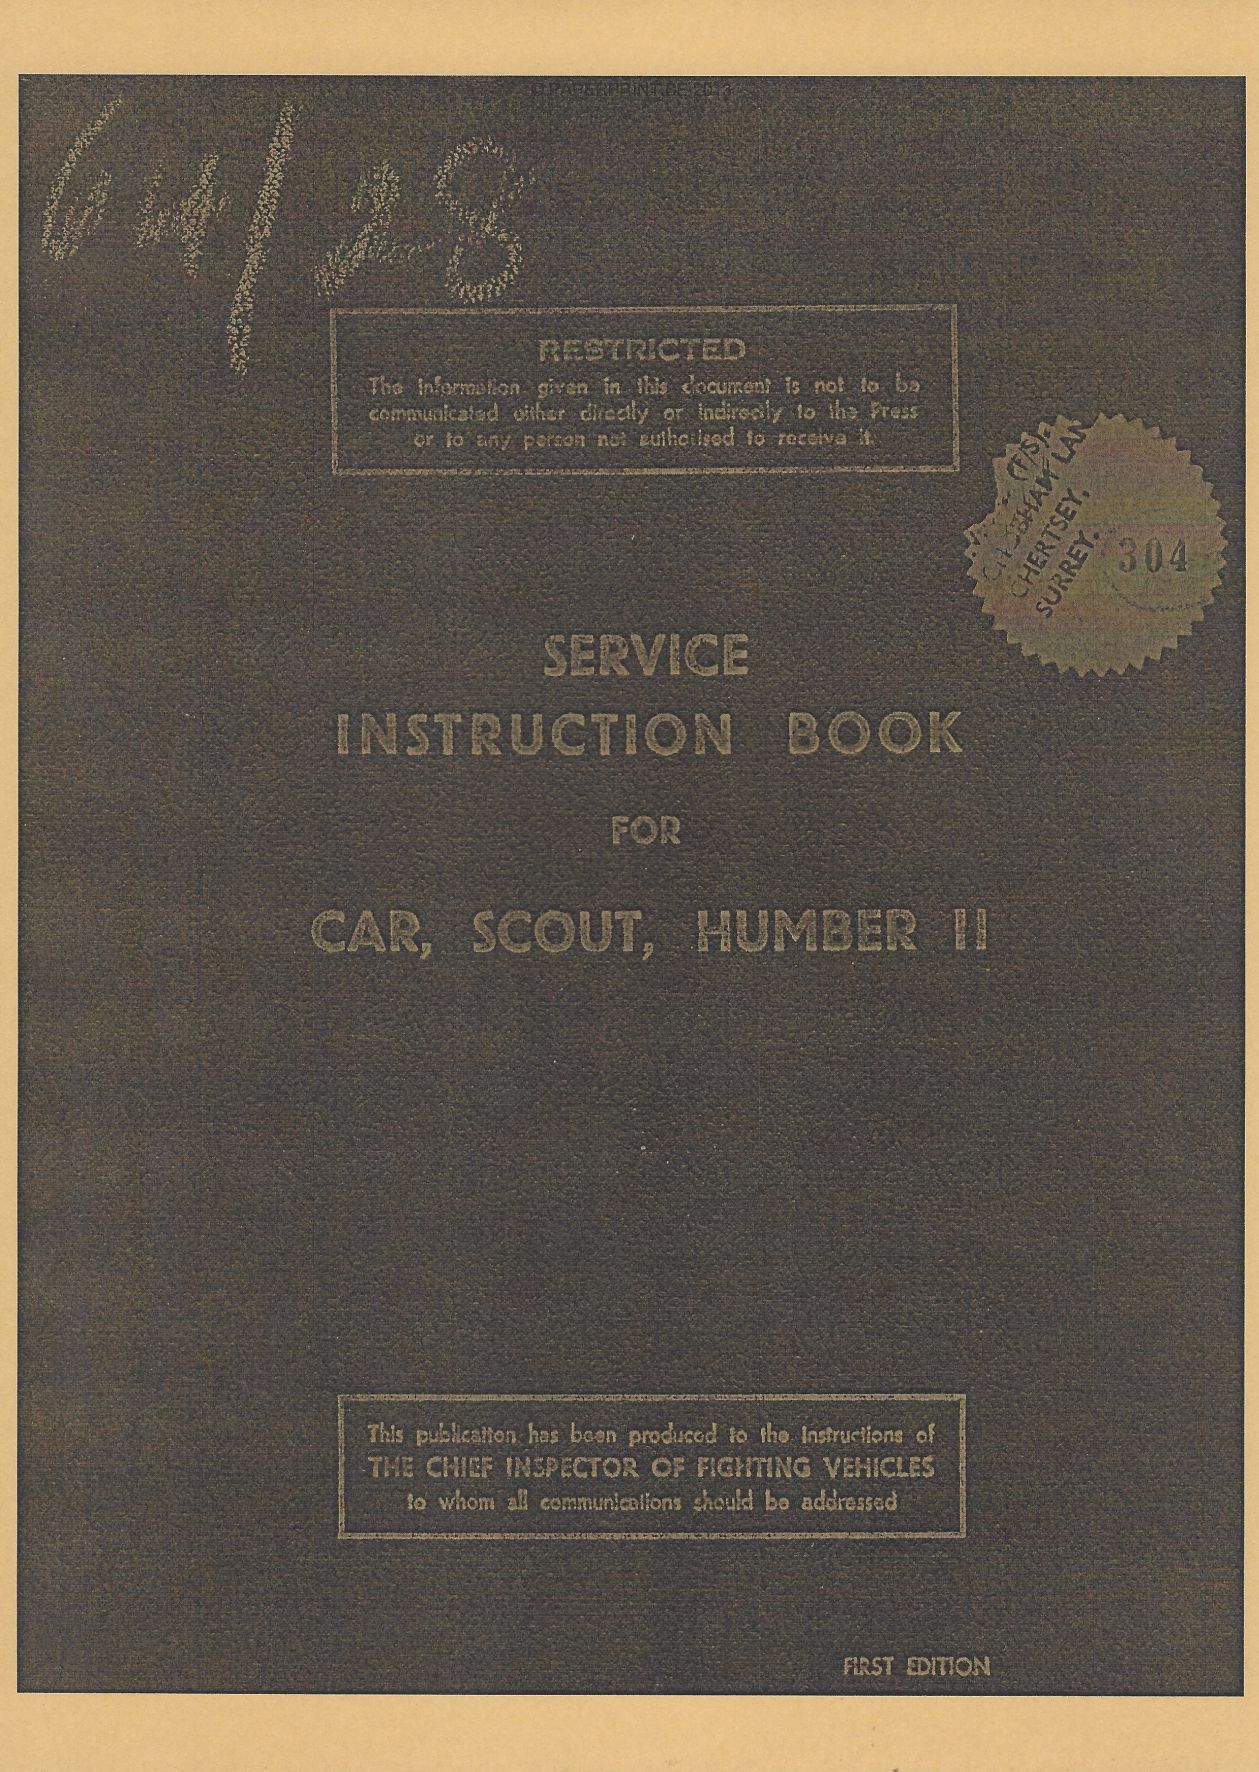 SERVICE INSTRUCTION BOOK FOR HUMBER SCOUT CAR